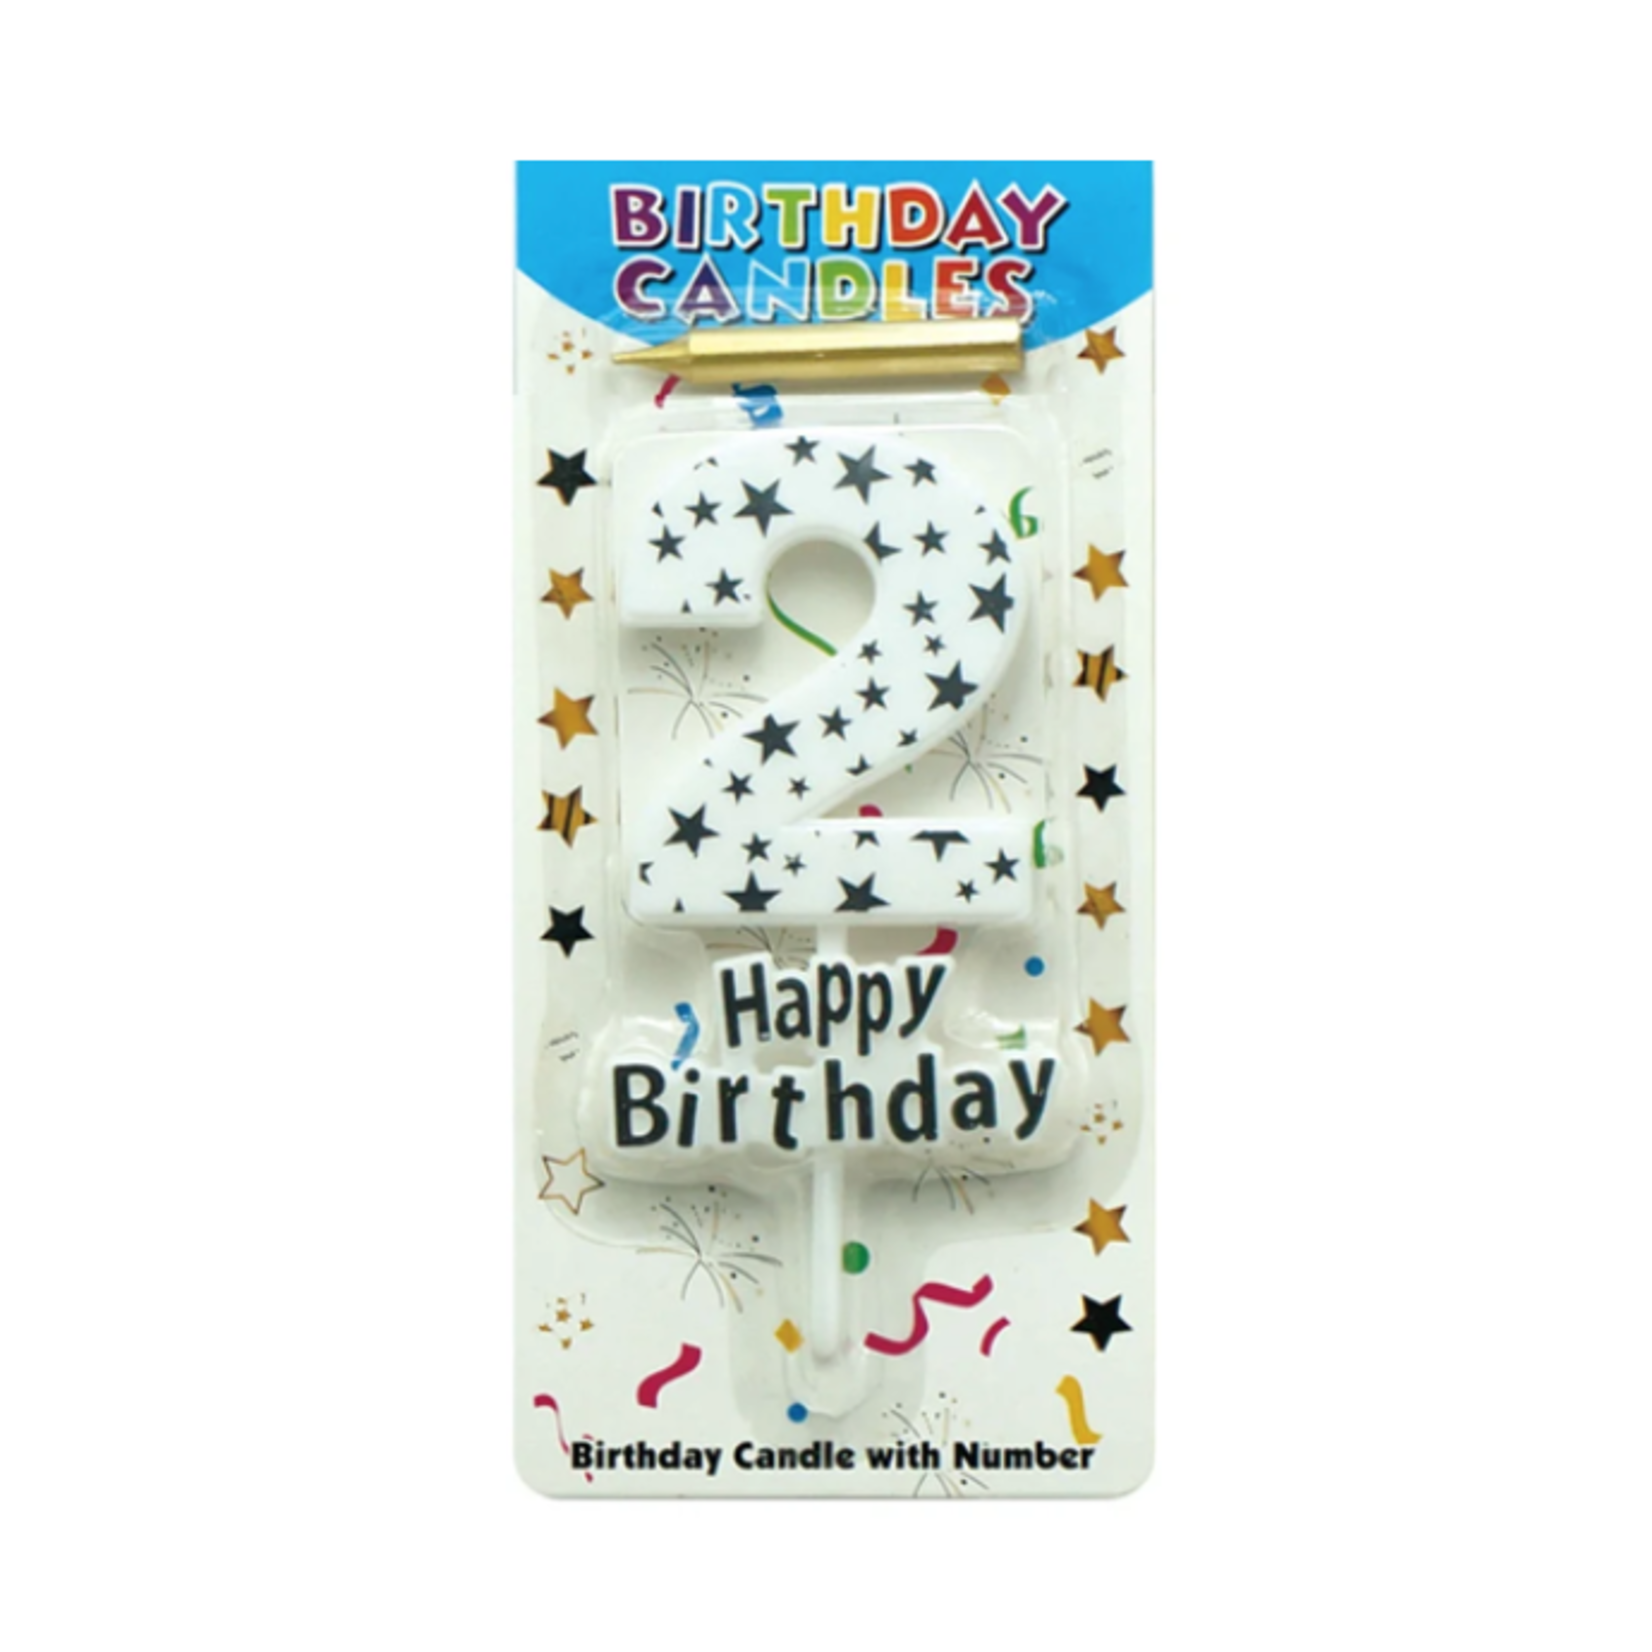 HAPPY BIRTHDAY CANDLE #2 WHITE WITH GOLD STARS